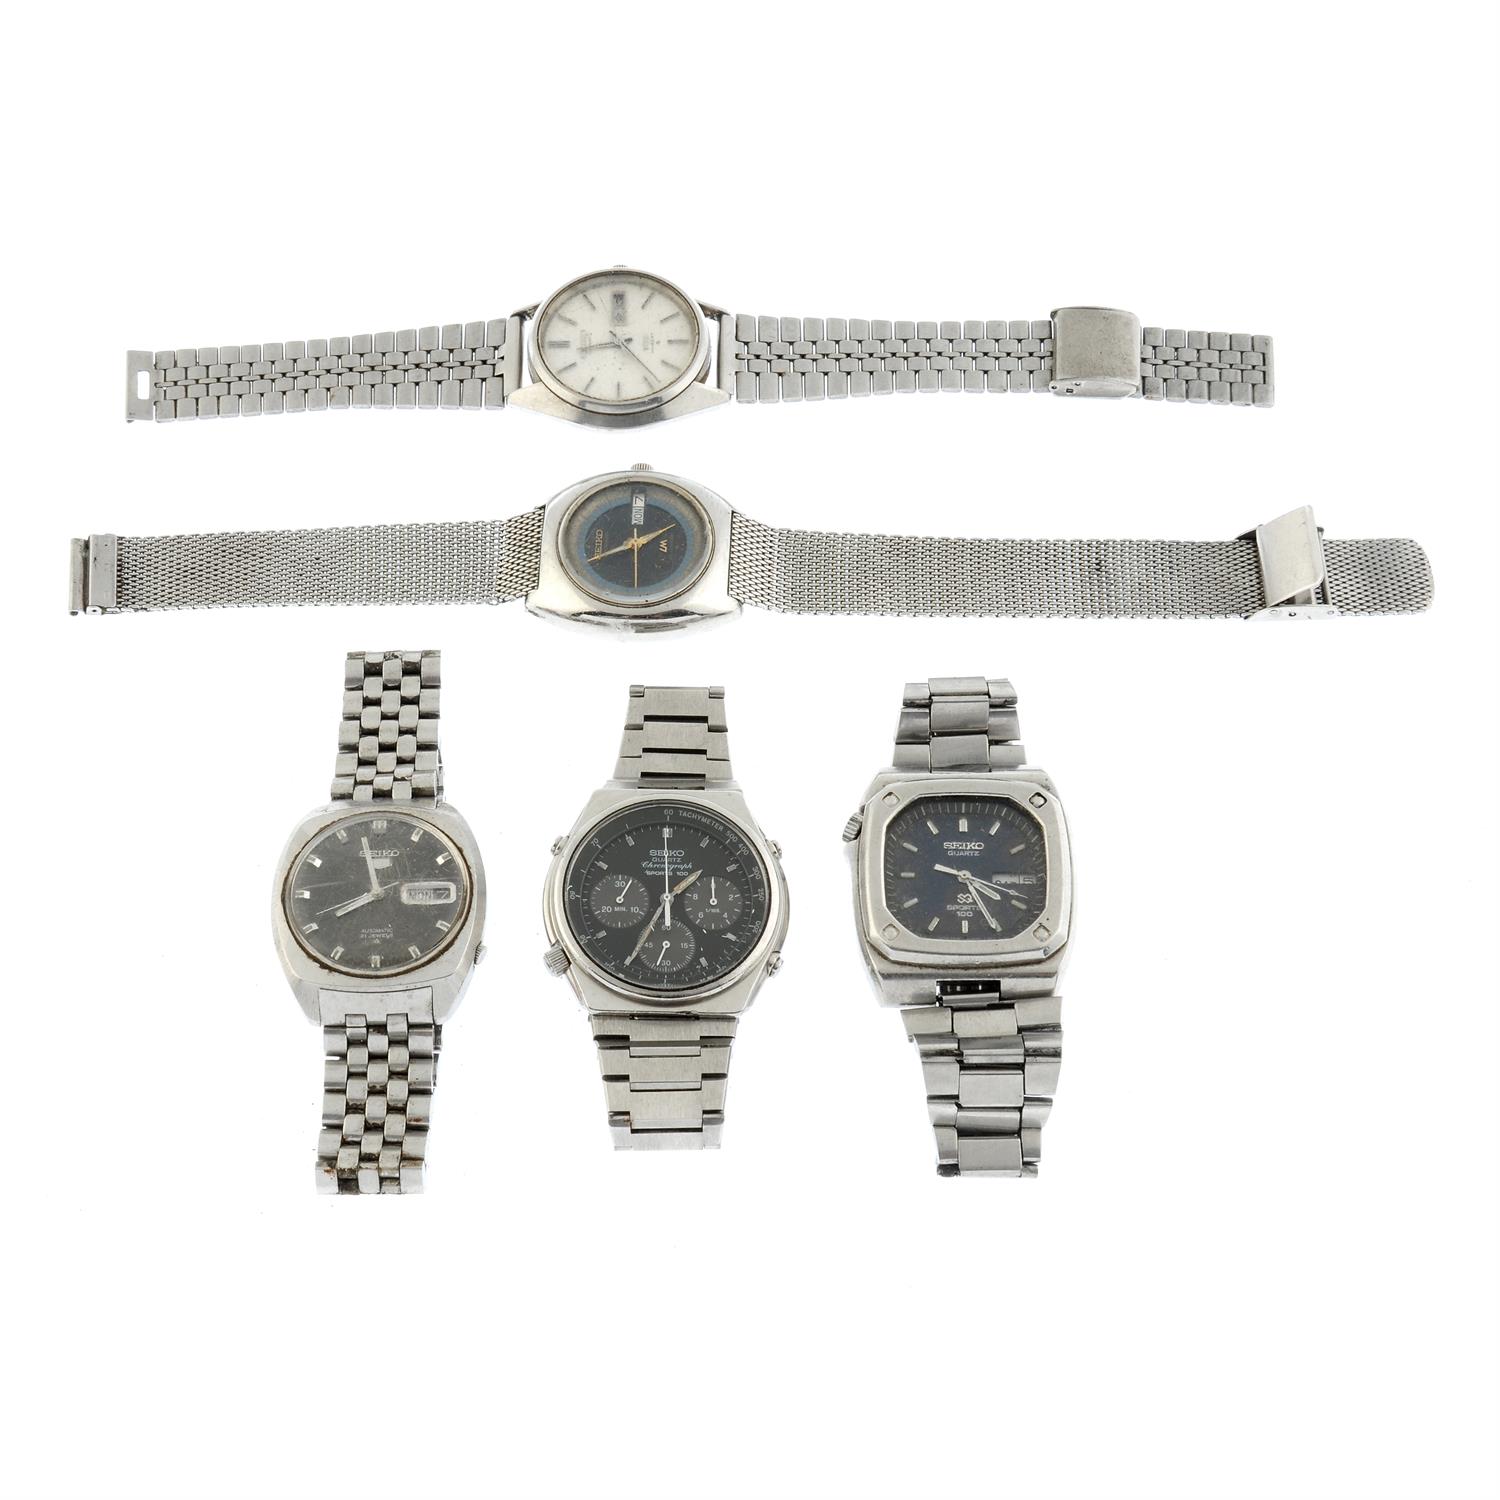 A group of five Seiko watches.